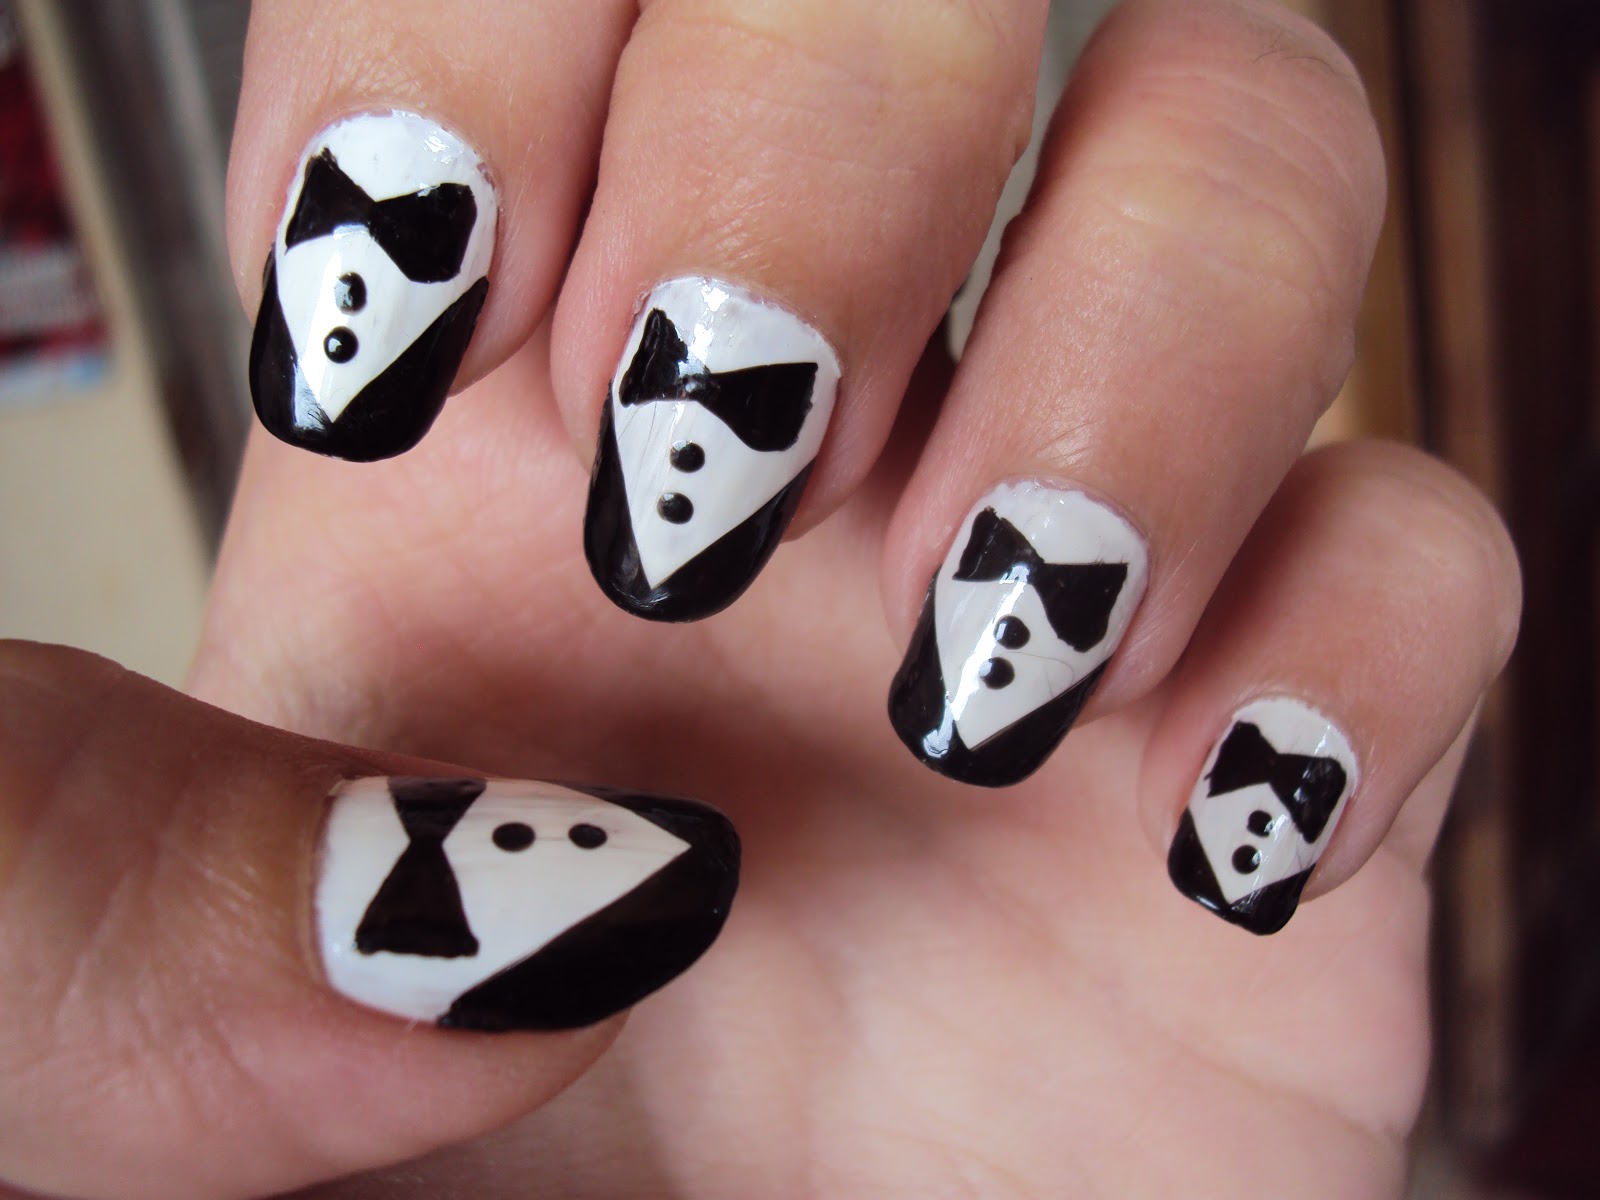 10. Tuxedo Nail Design with Ombre Effect - wide 5